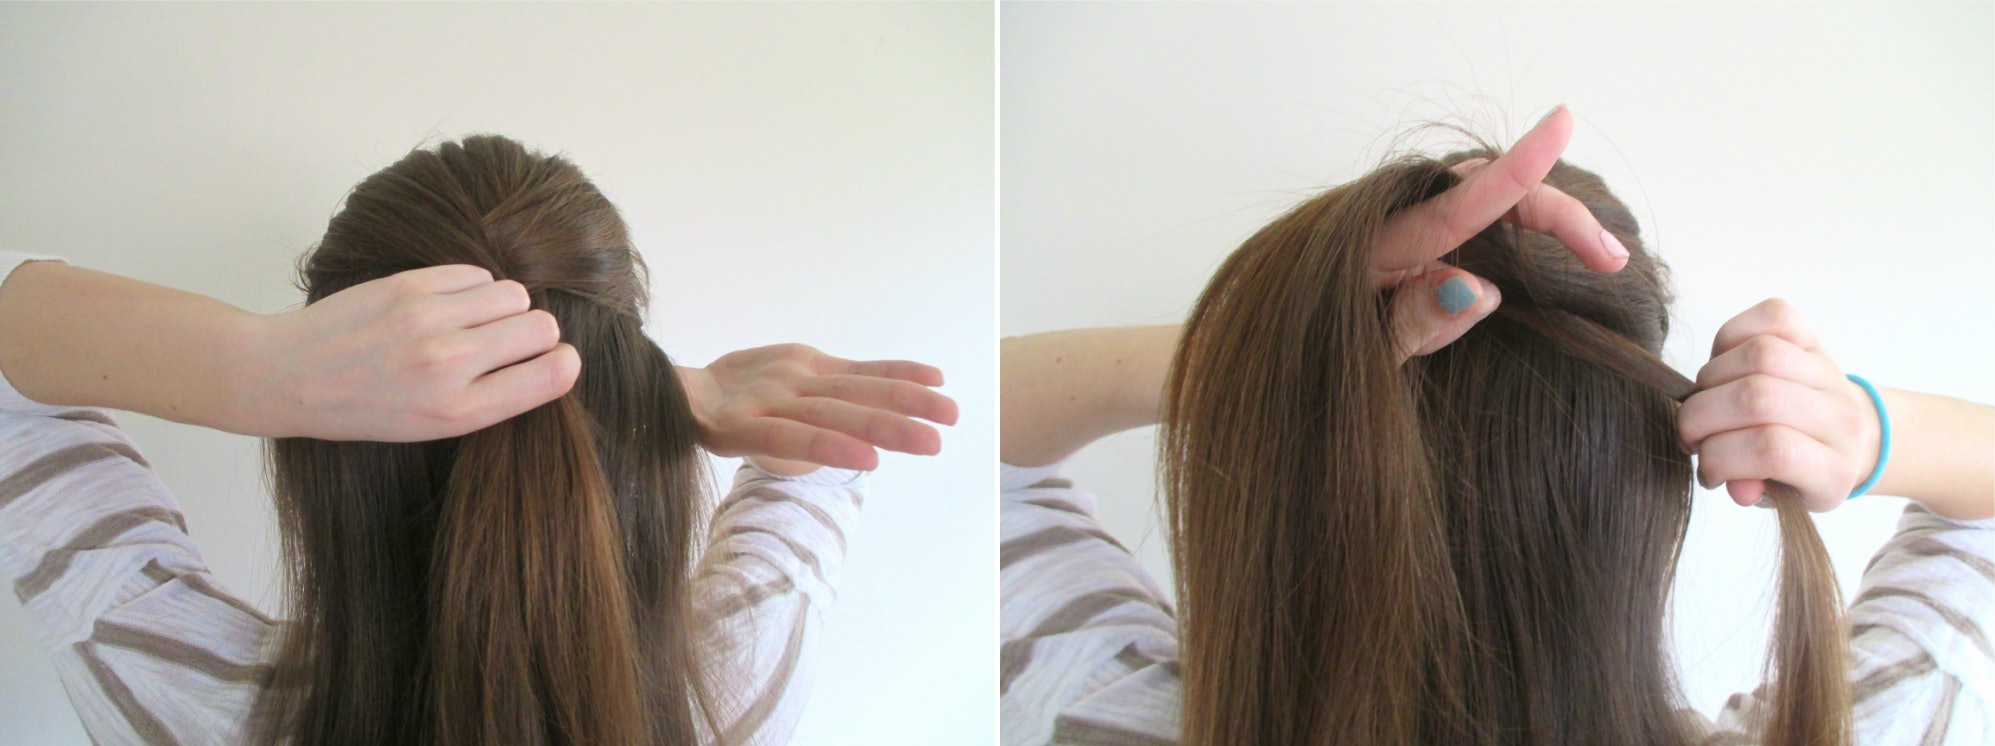 How To French Braid Your Hair In 6 Steps Because This Is One Plait You Should Definitely Have Down